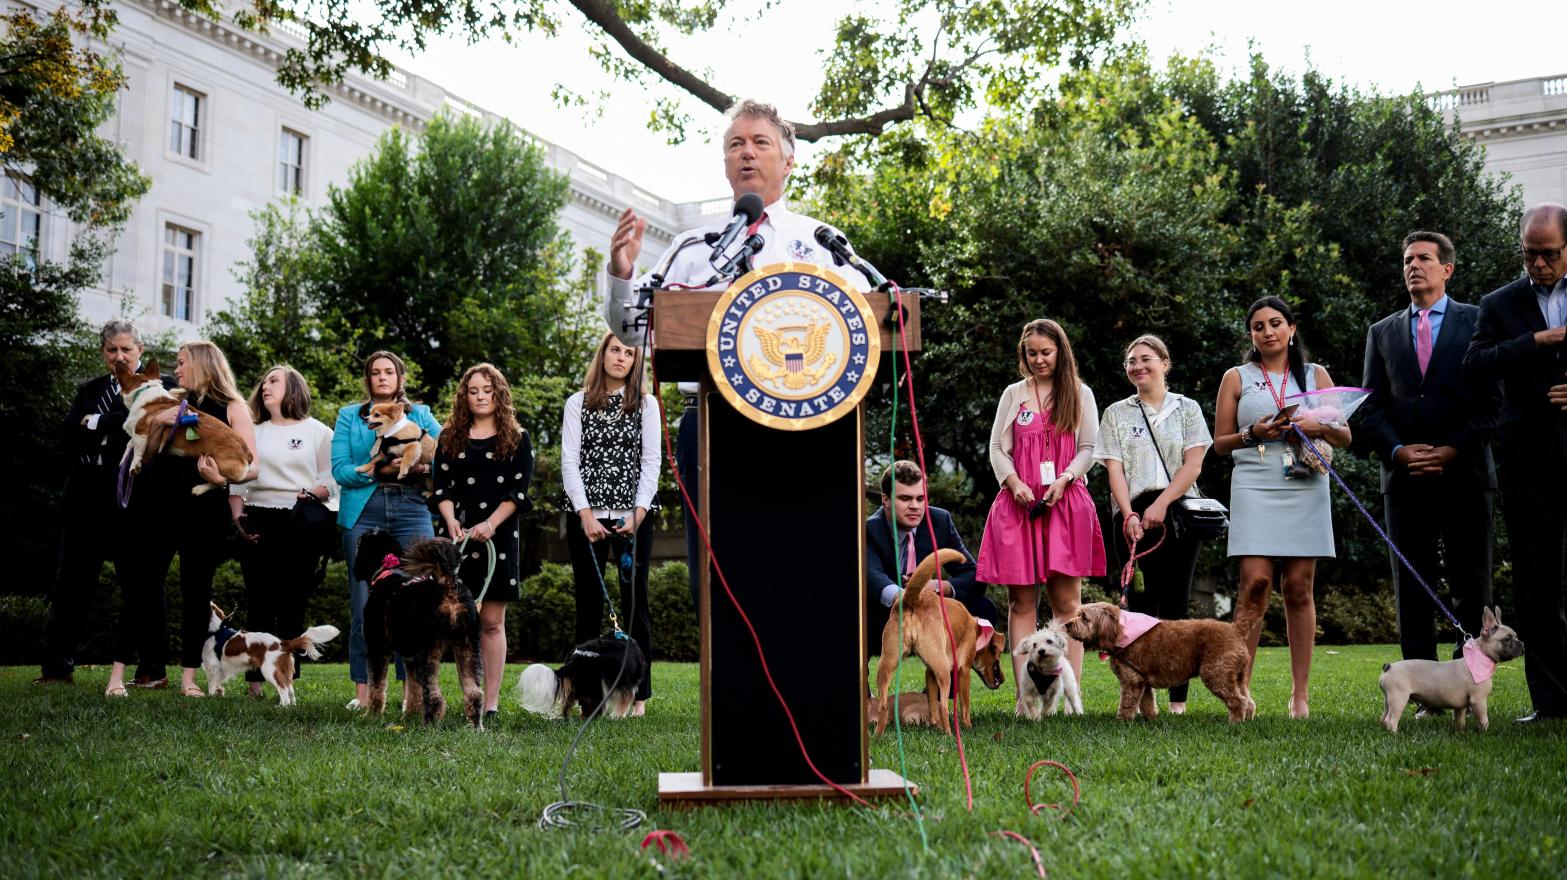 Senate staff members and their dogs look on as Sen. Rand Paul (R-KY) speaks at a press conference on his FDA Modernisation Act on Capitol Hill on October 07, 2021 in Washington, DC.  (Photo: Anna Moneymaker, Getty Images)